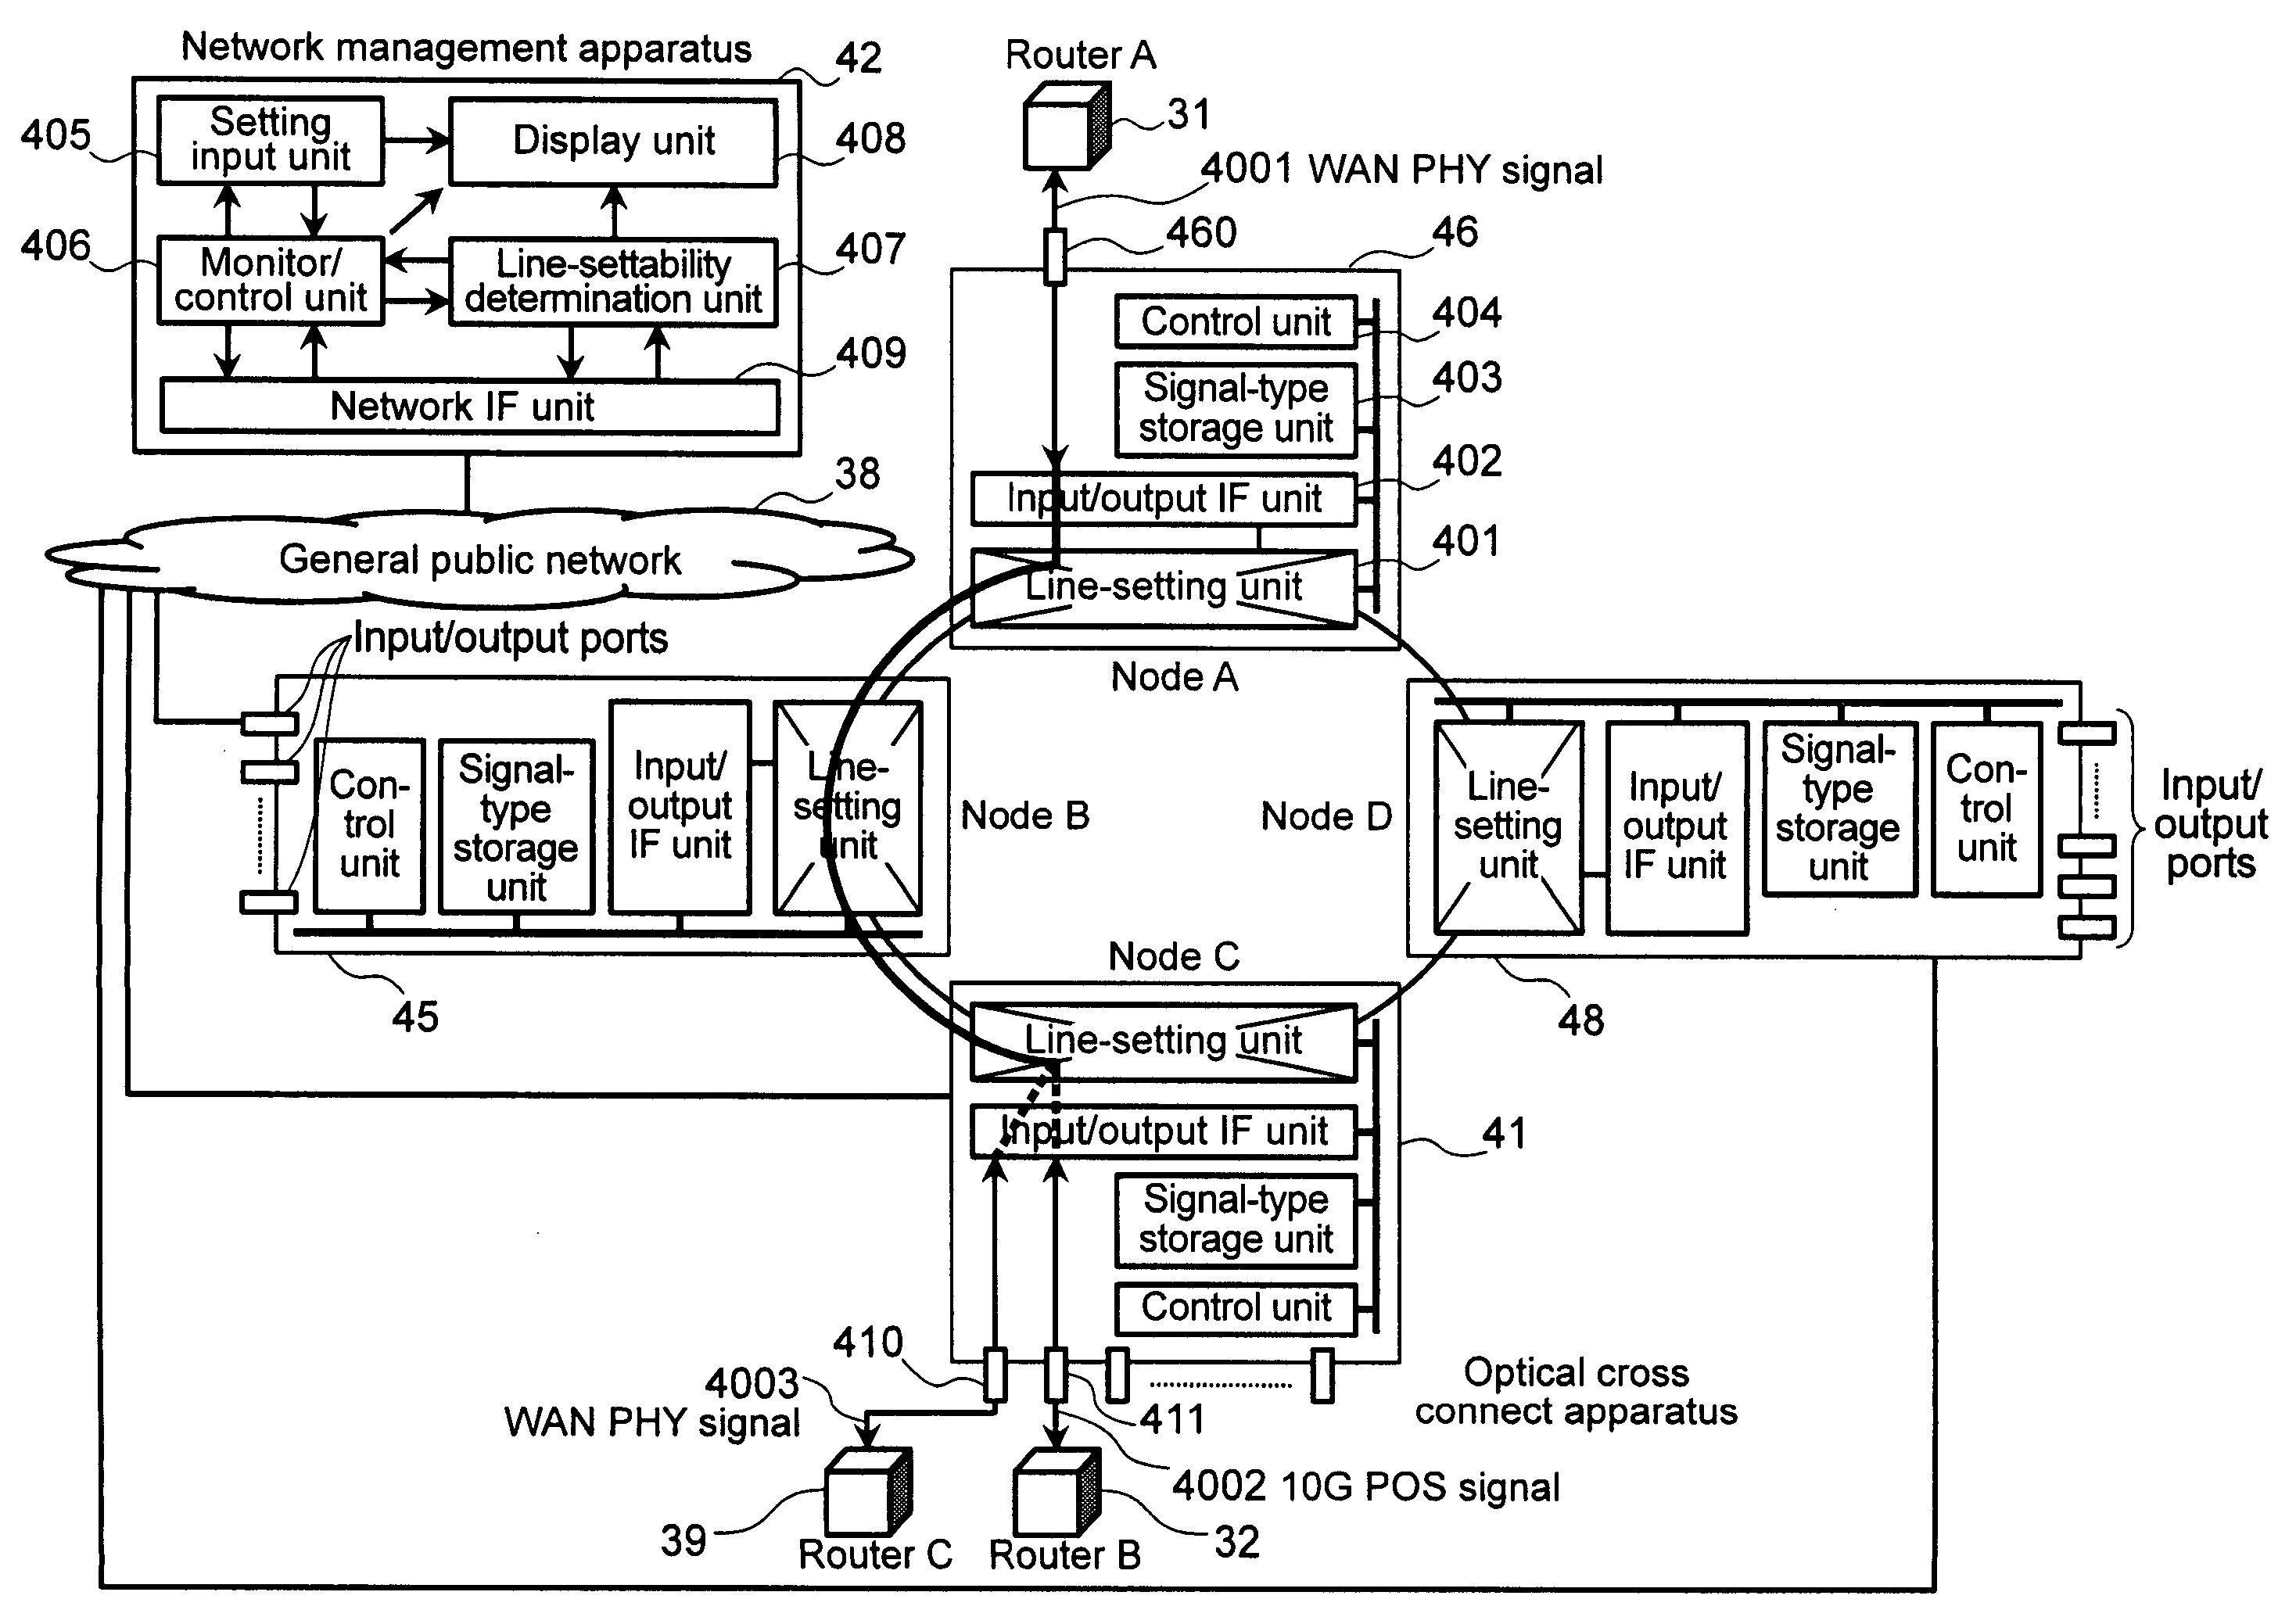 Optical cross connect apparatus and network